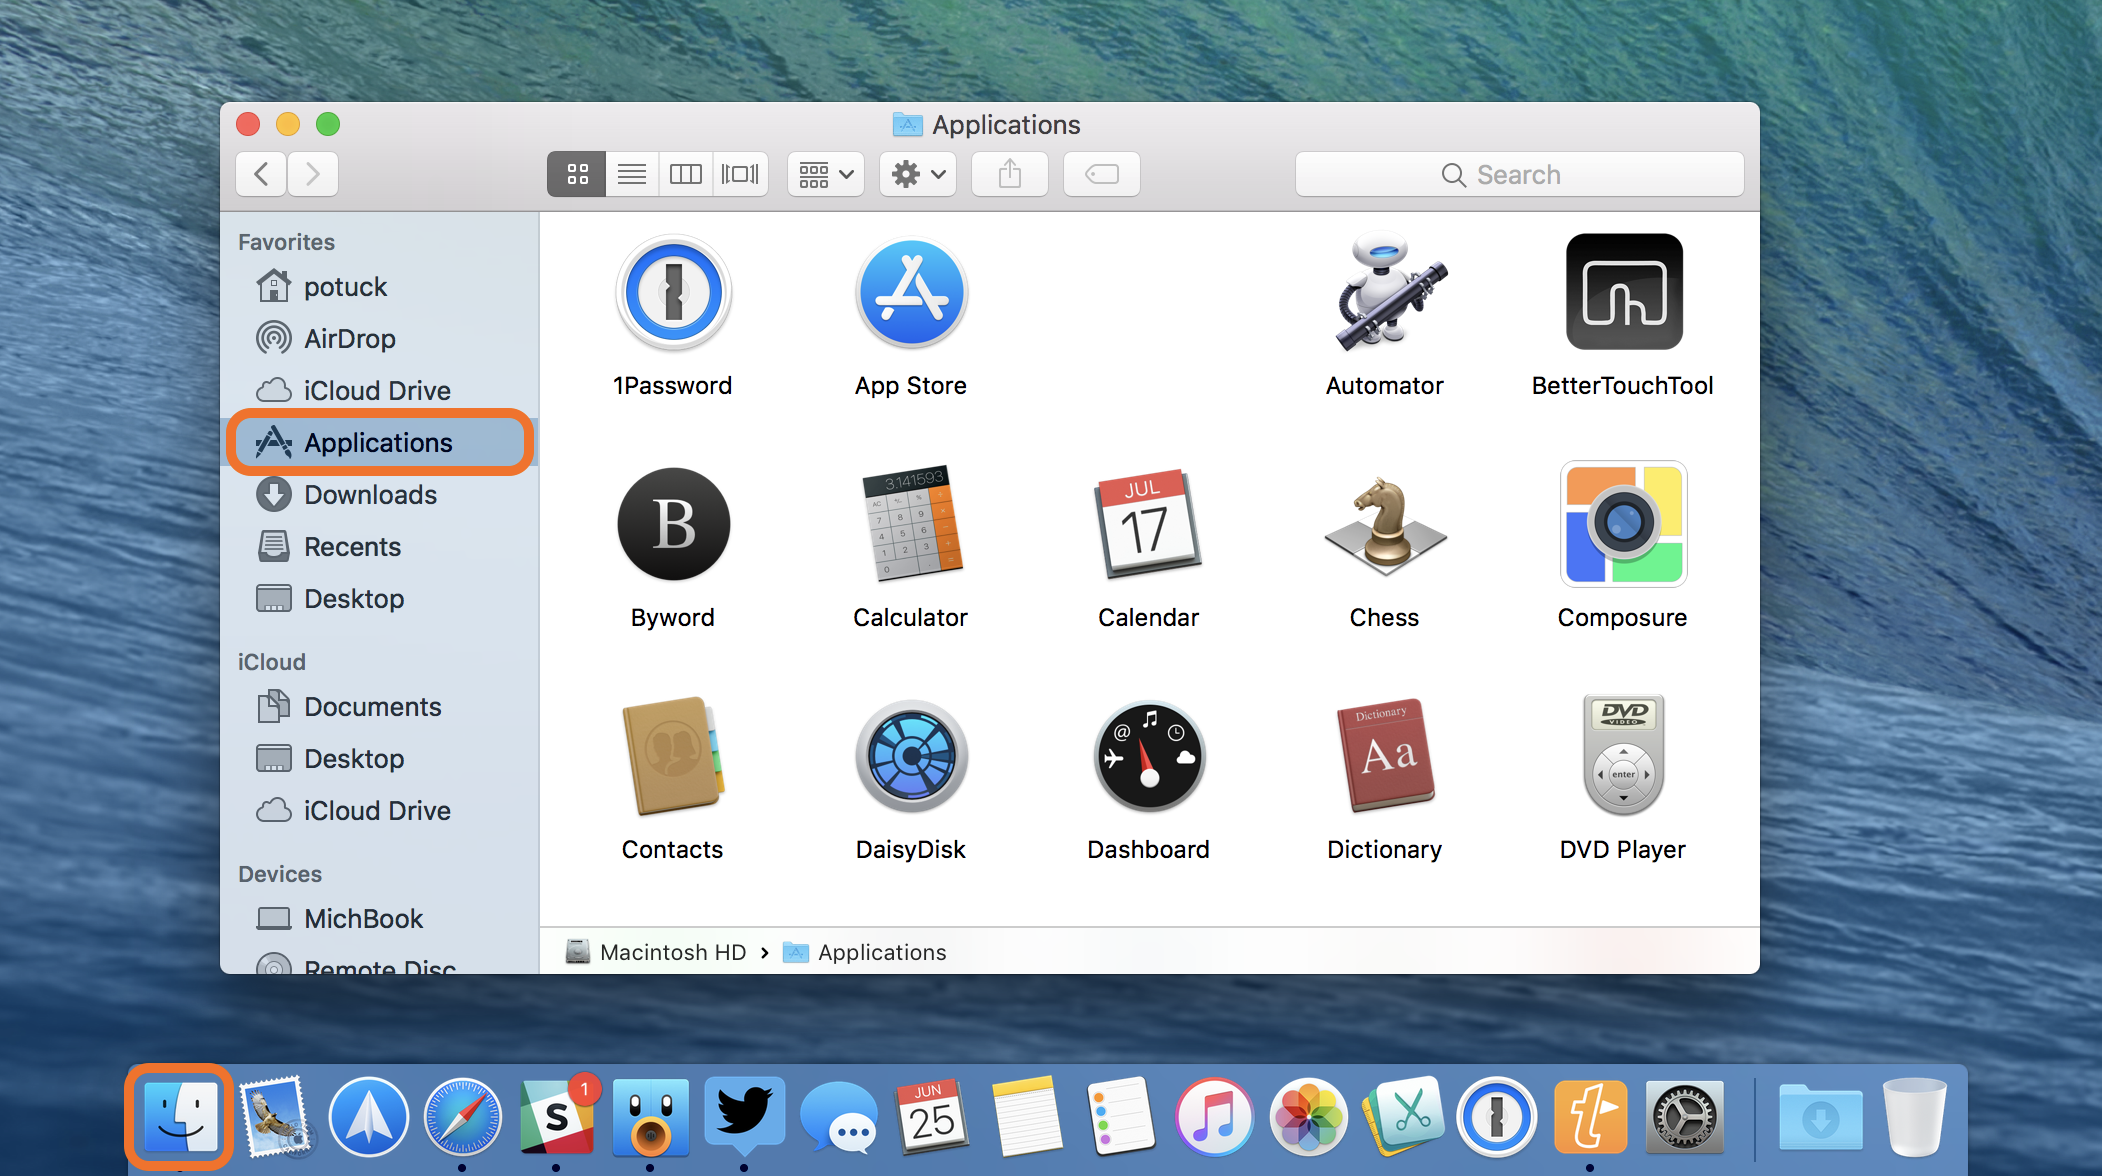 How To Delete Or Uninstall Software Apps On Mac